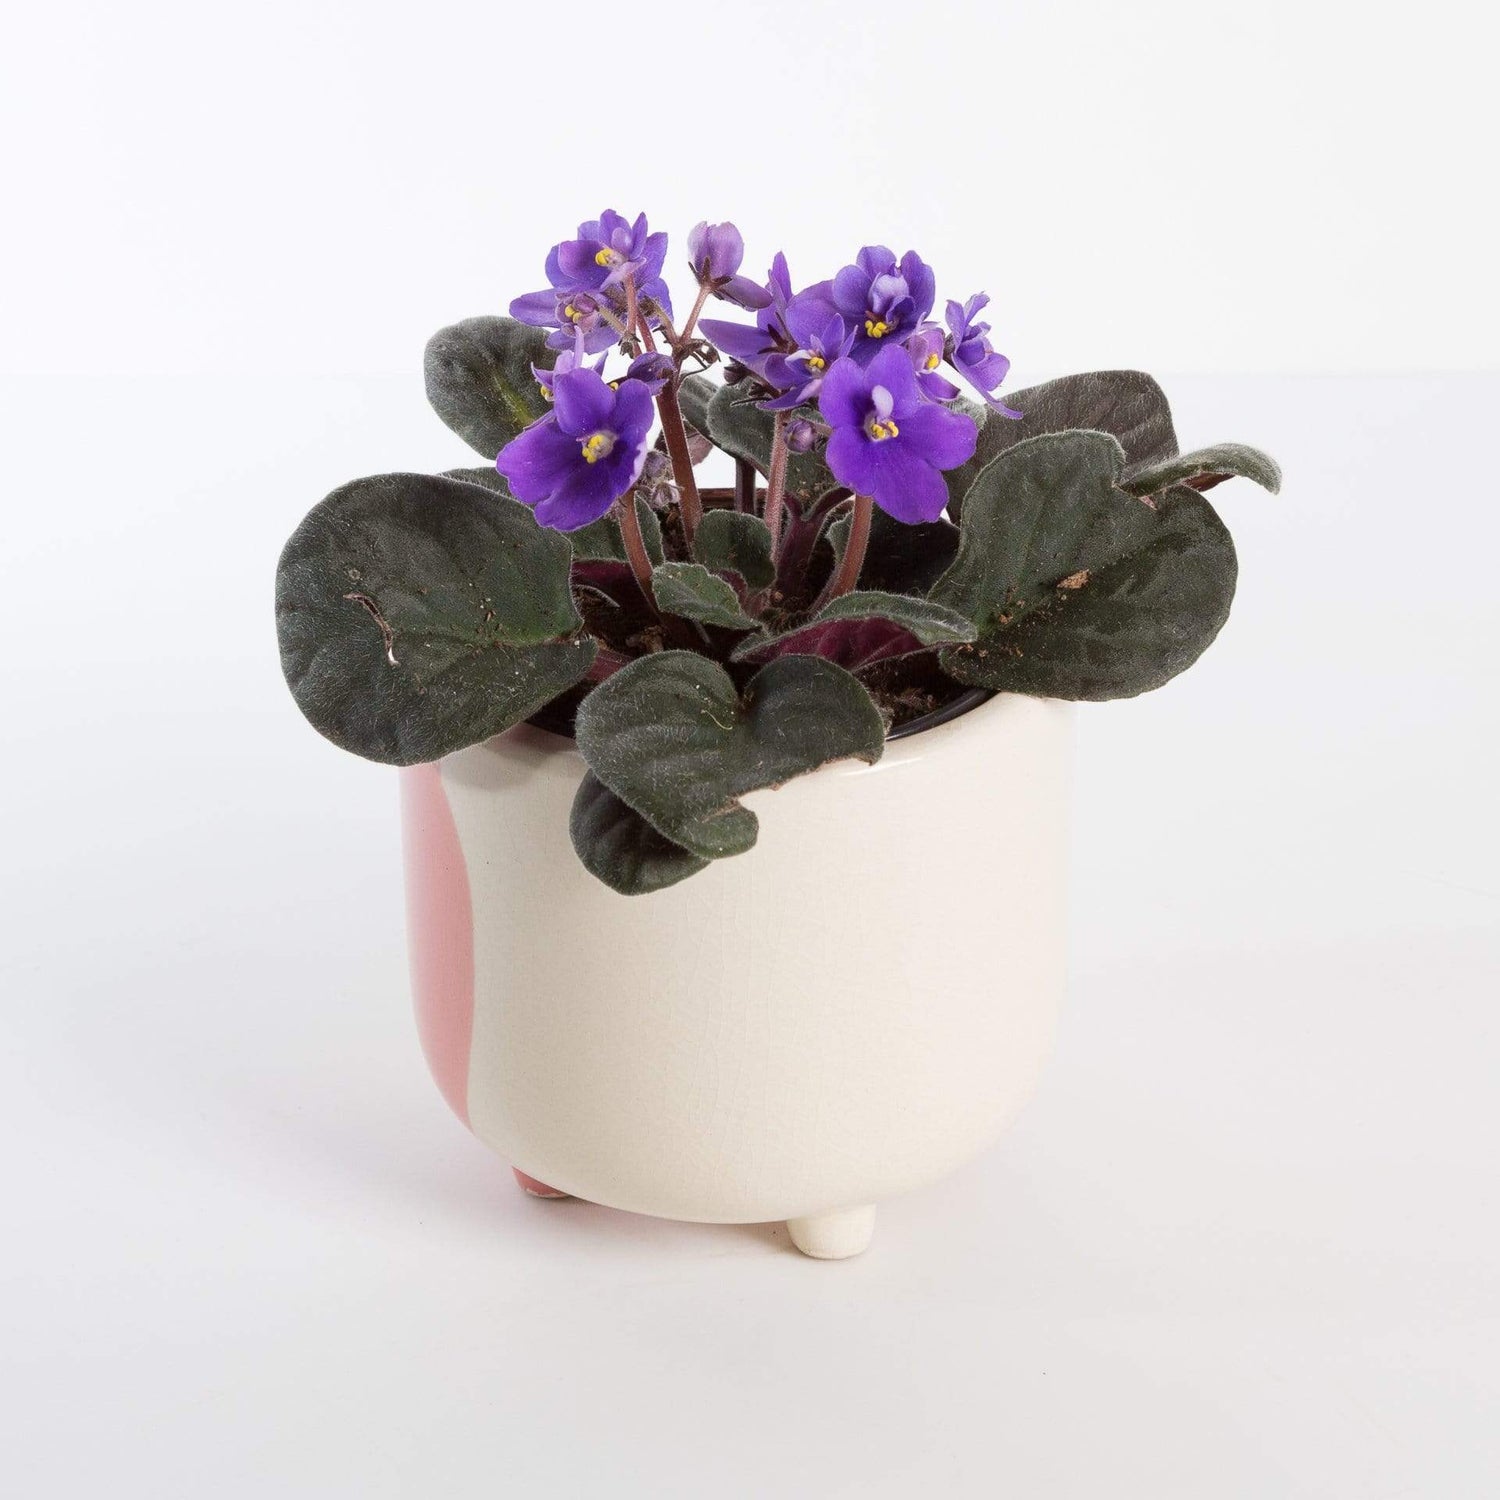 Urban Sprouts Plant 4" in nursery pot African Violet